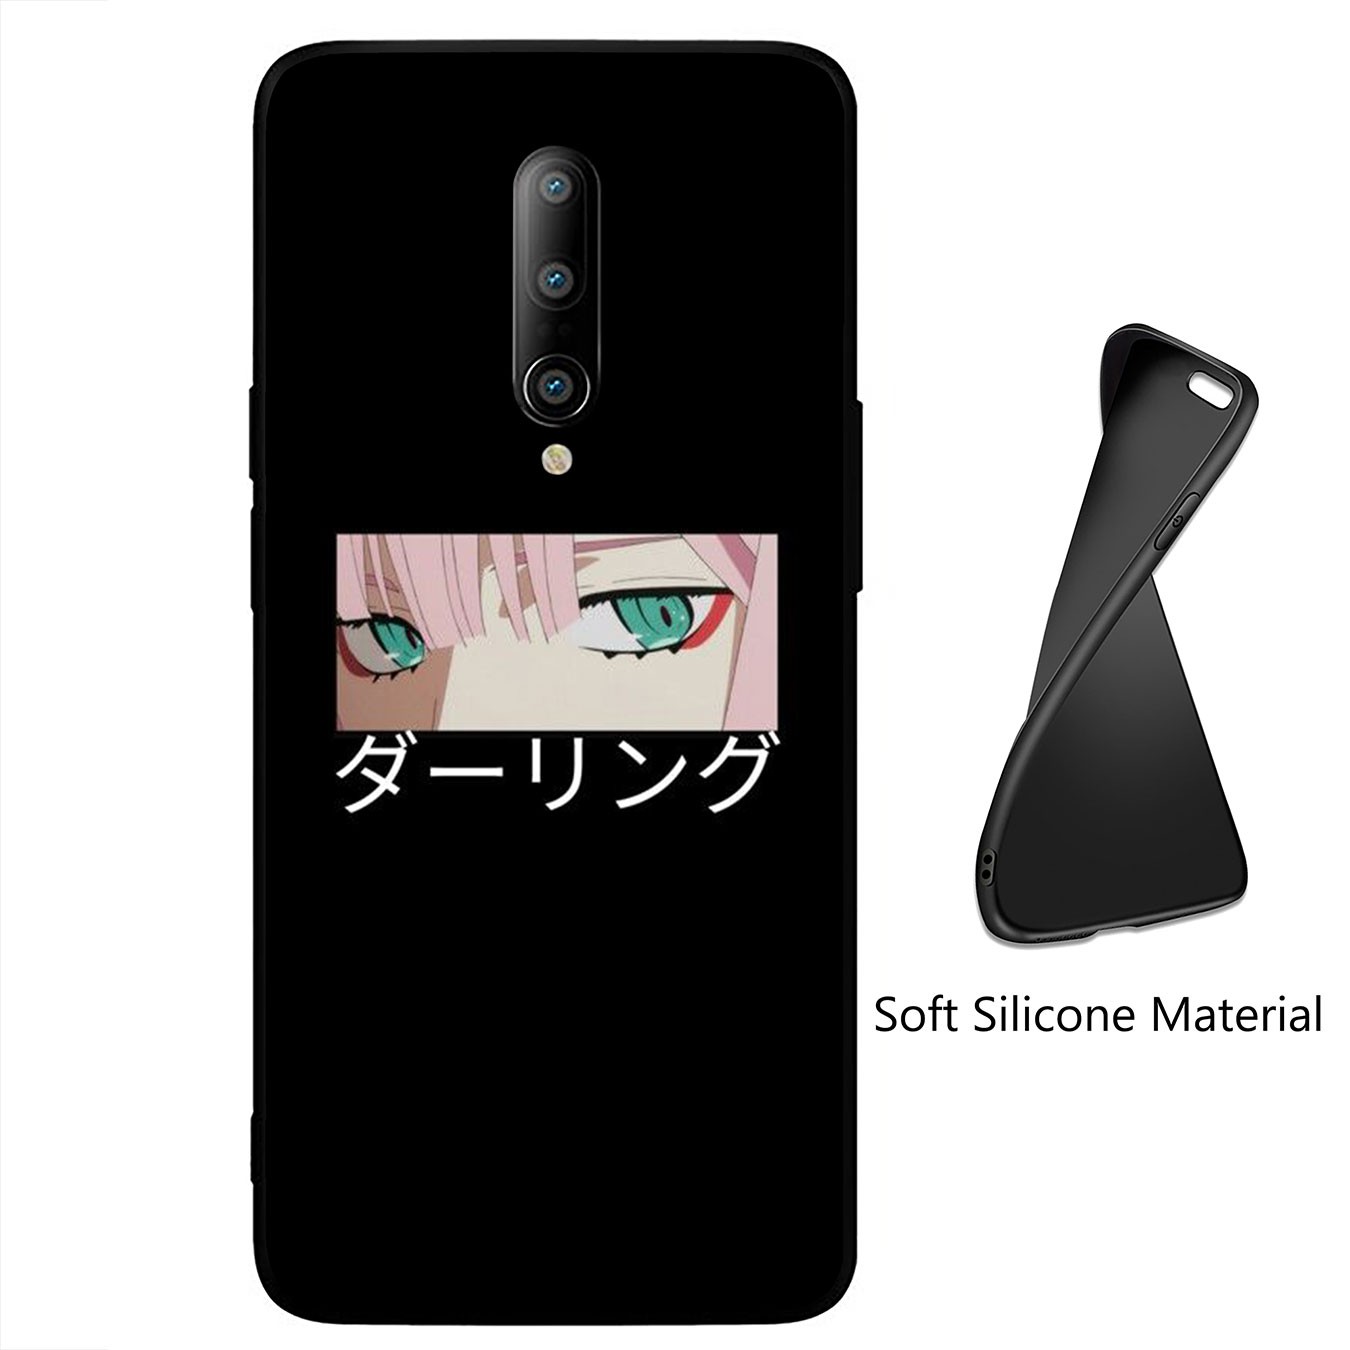 Samsung Galaxy A9 A8 A7 A6 Plus J8 2018 + A21S A70 M20 A6+ A8+ 6Plus Casing Soft Silicone Darling in The Franxx 002 Phone Case